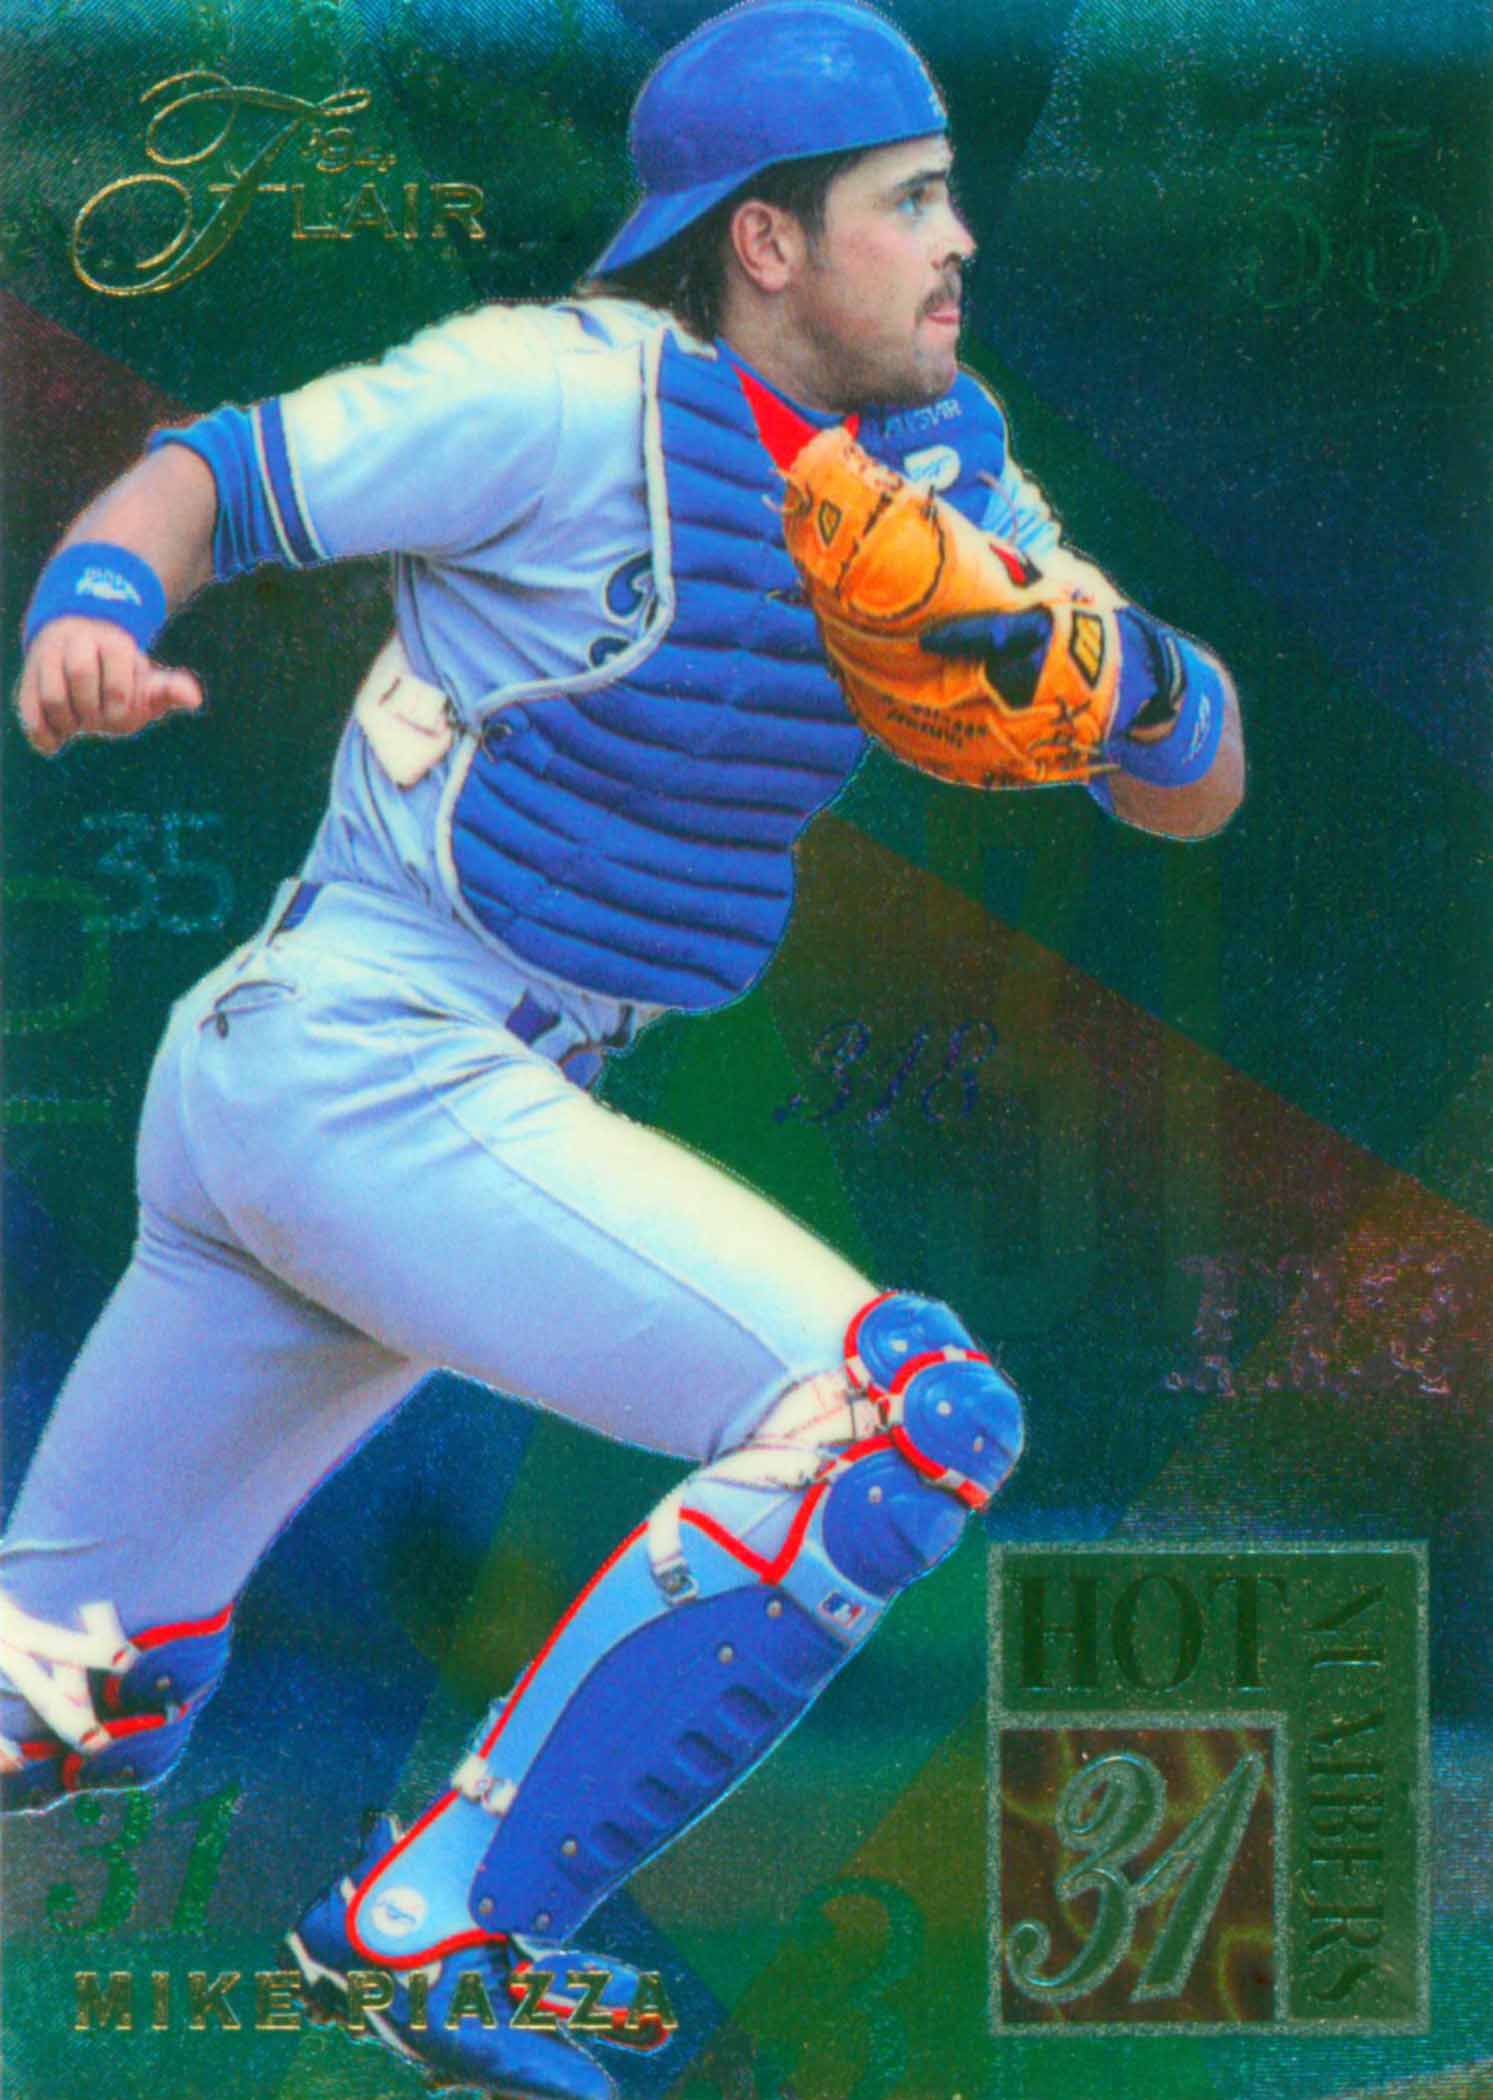 Mike Piazza Marlins Card Collection Gets Hall of Fame Display